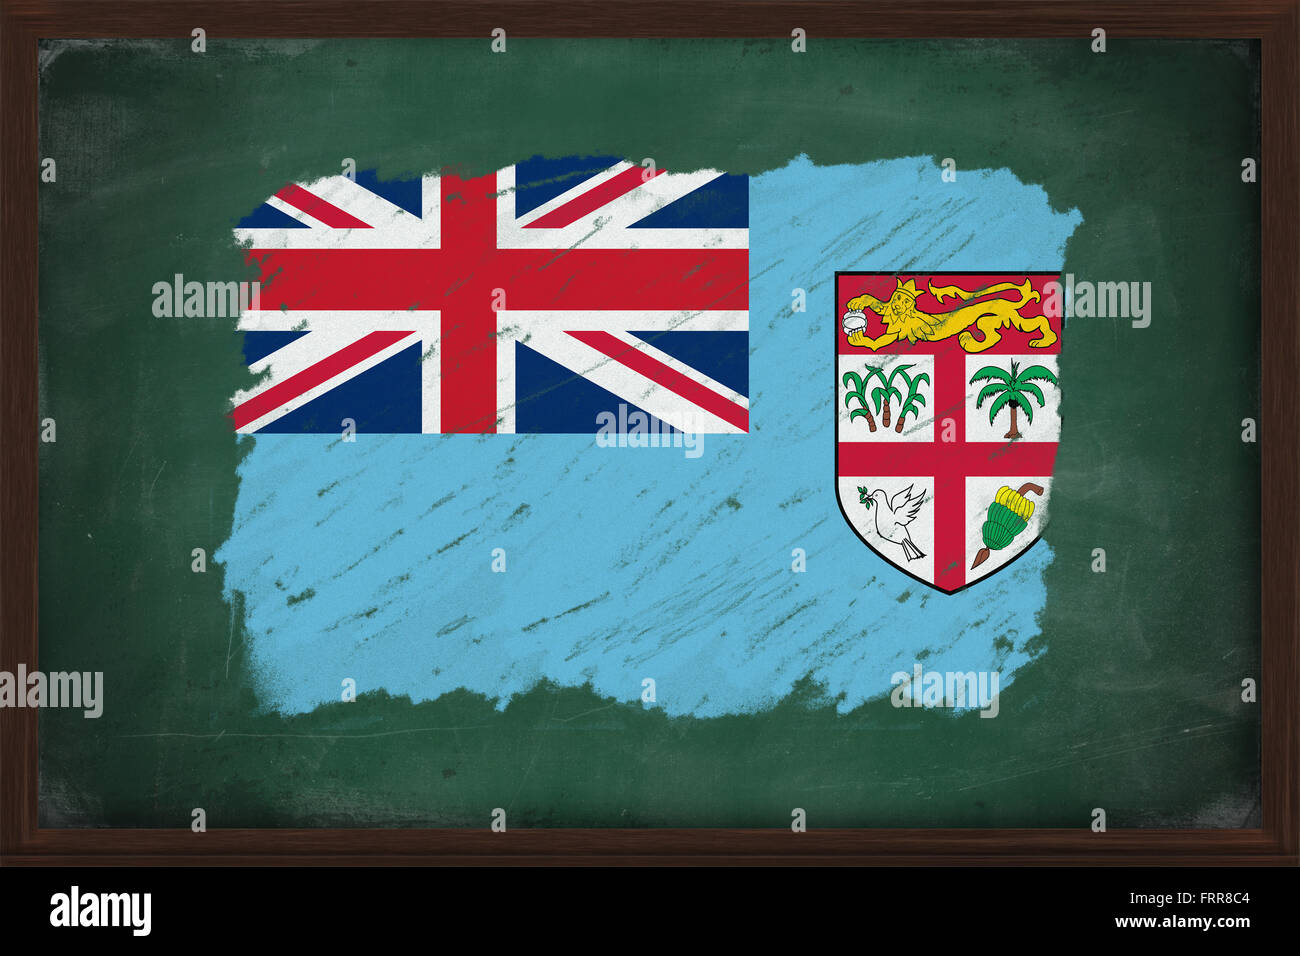 Fiji flag painted with color chalk on old blackboard Stock Photo